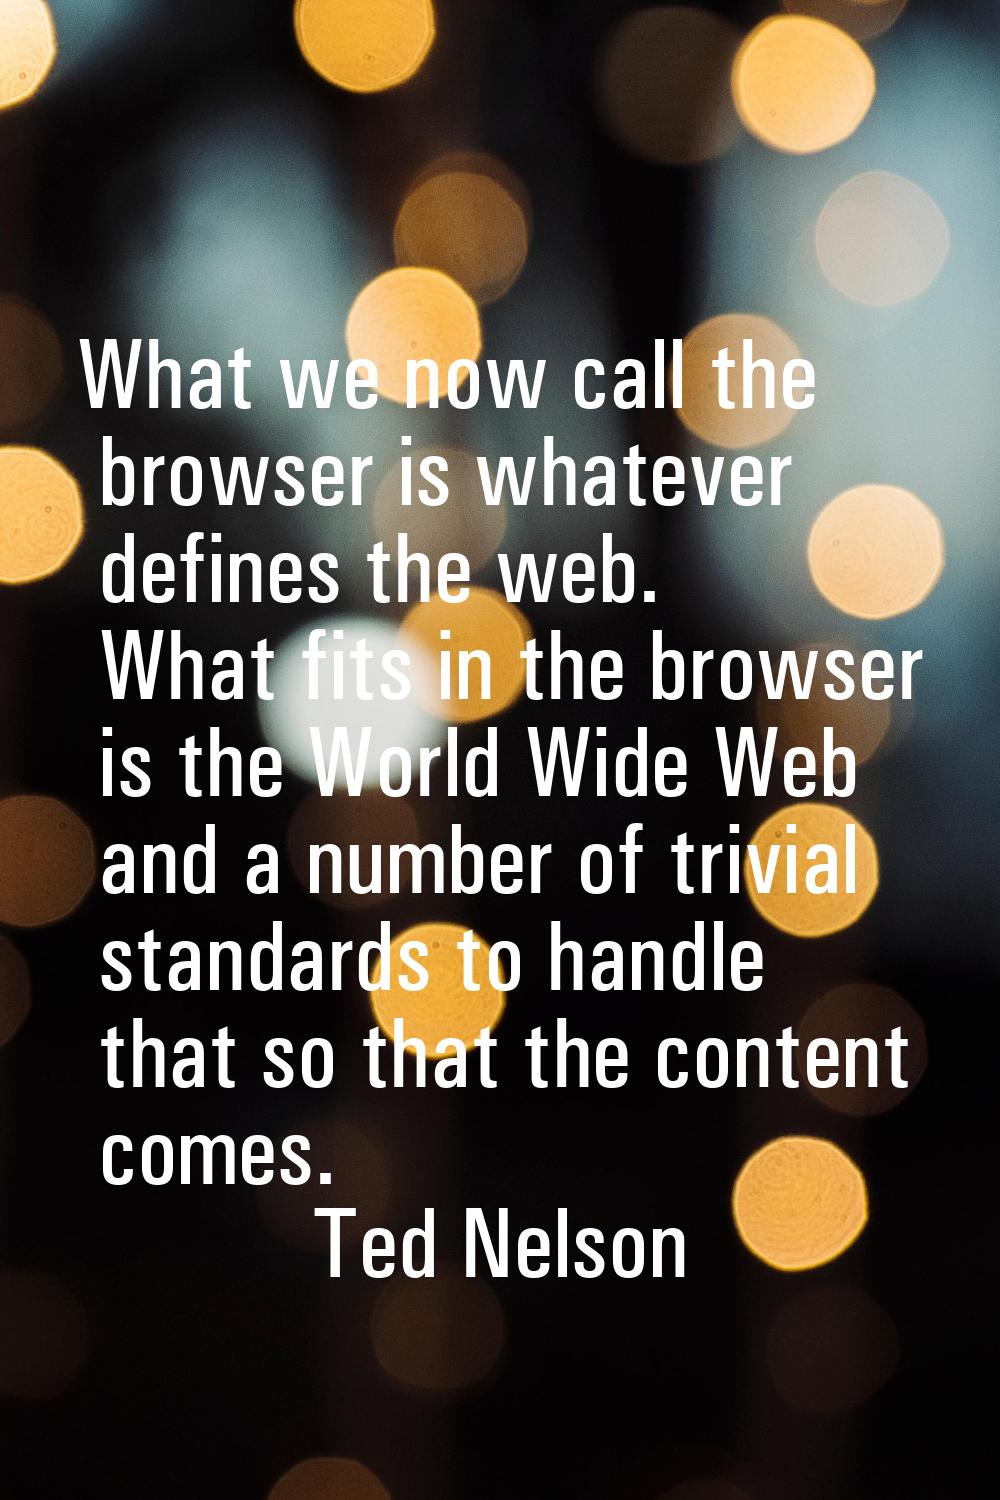 What we now call the browser is whatever defines the web. What fits in the browser is the World Wid